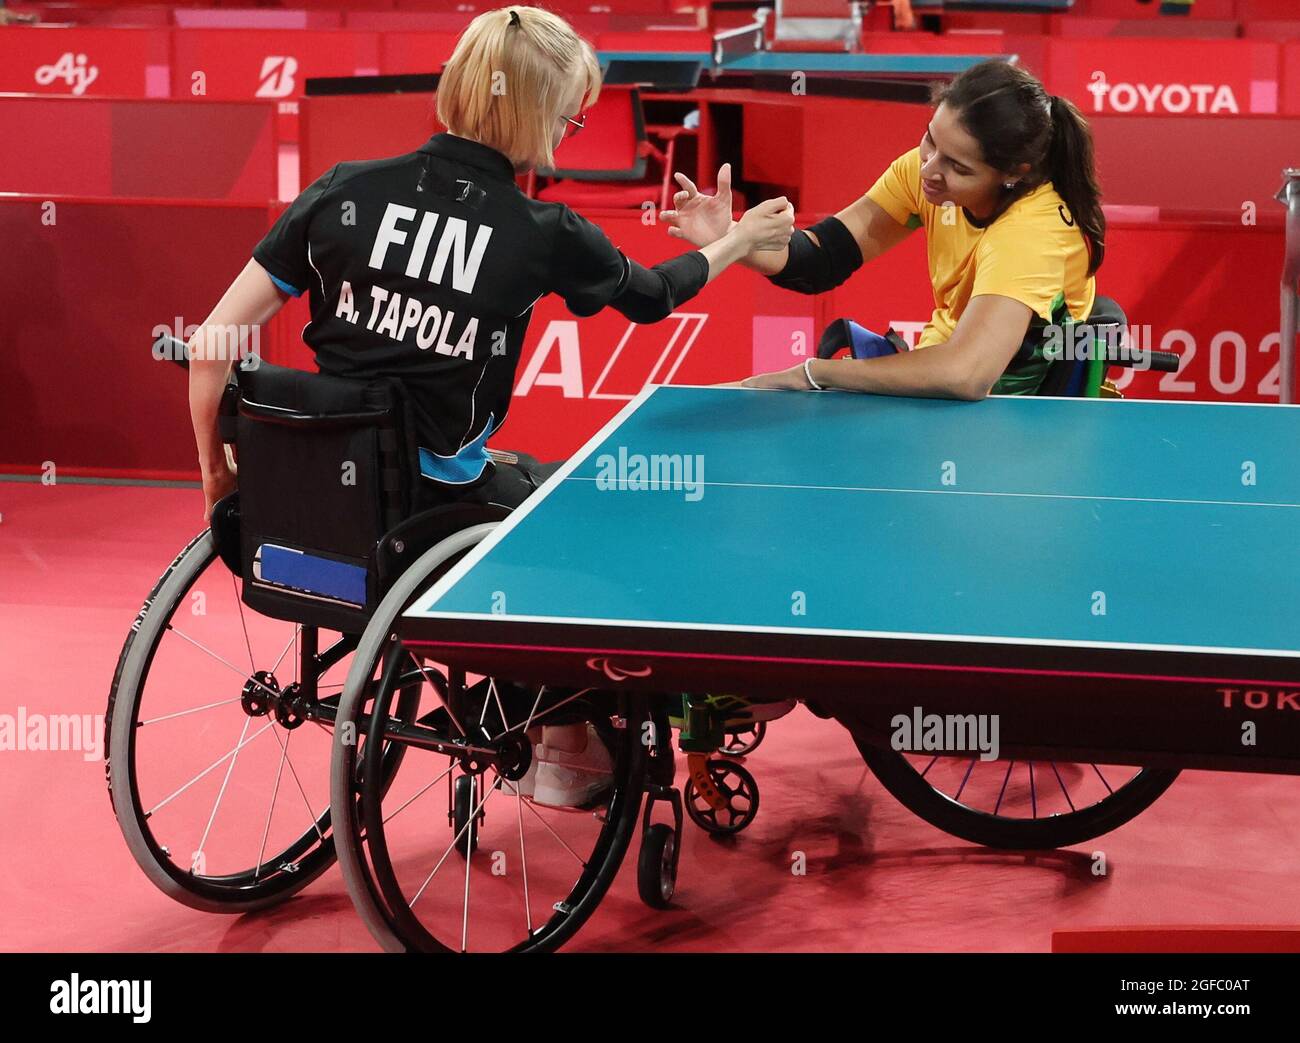 Tokyo 2020 Paralympic Games - Table Tennis - Women's Singles - Classes 1-2  Group D - Tokyo Metropolitan Gymnasium, Tokyo, Japan - August 25, 2021.  Aino Tapola of Finland shakes hands with